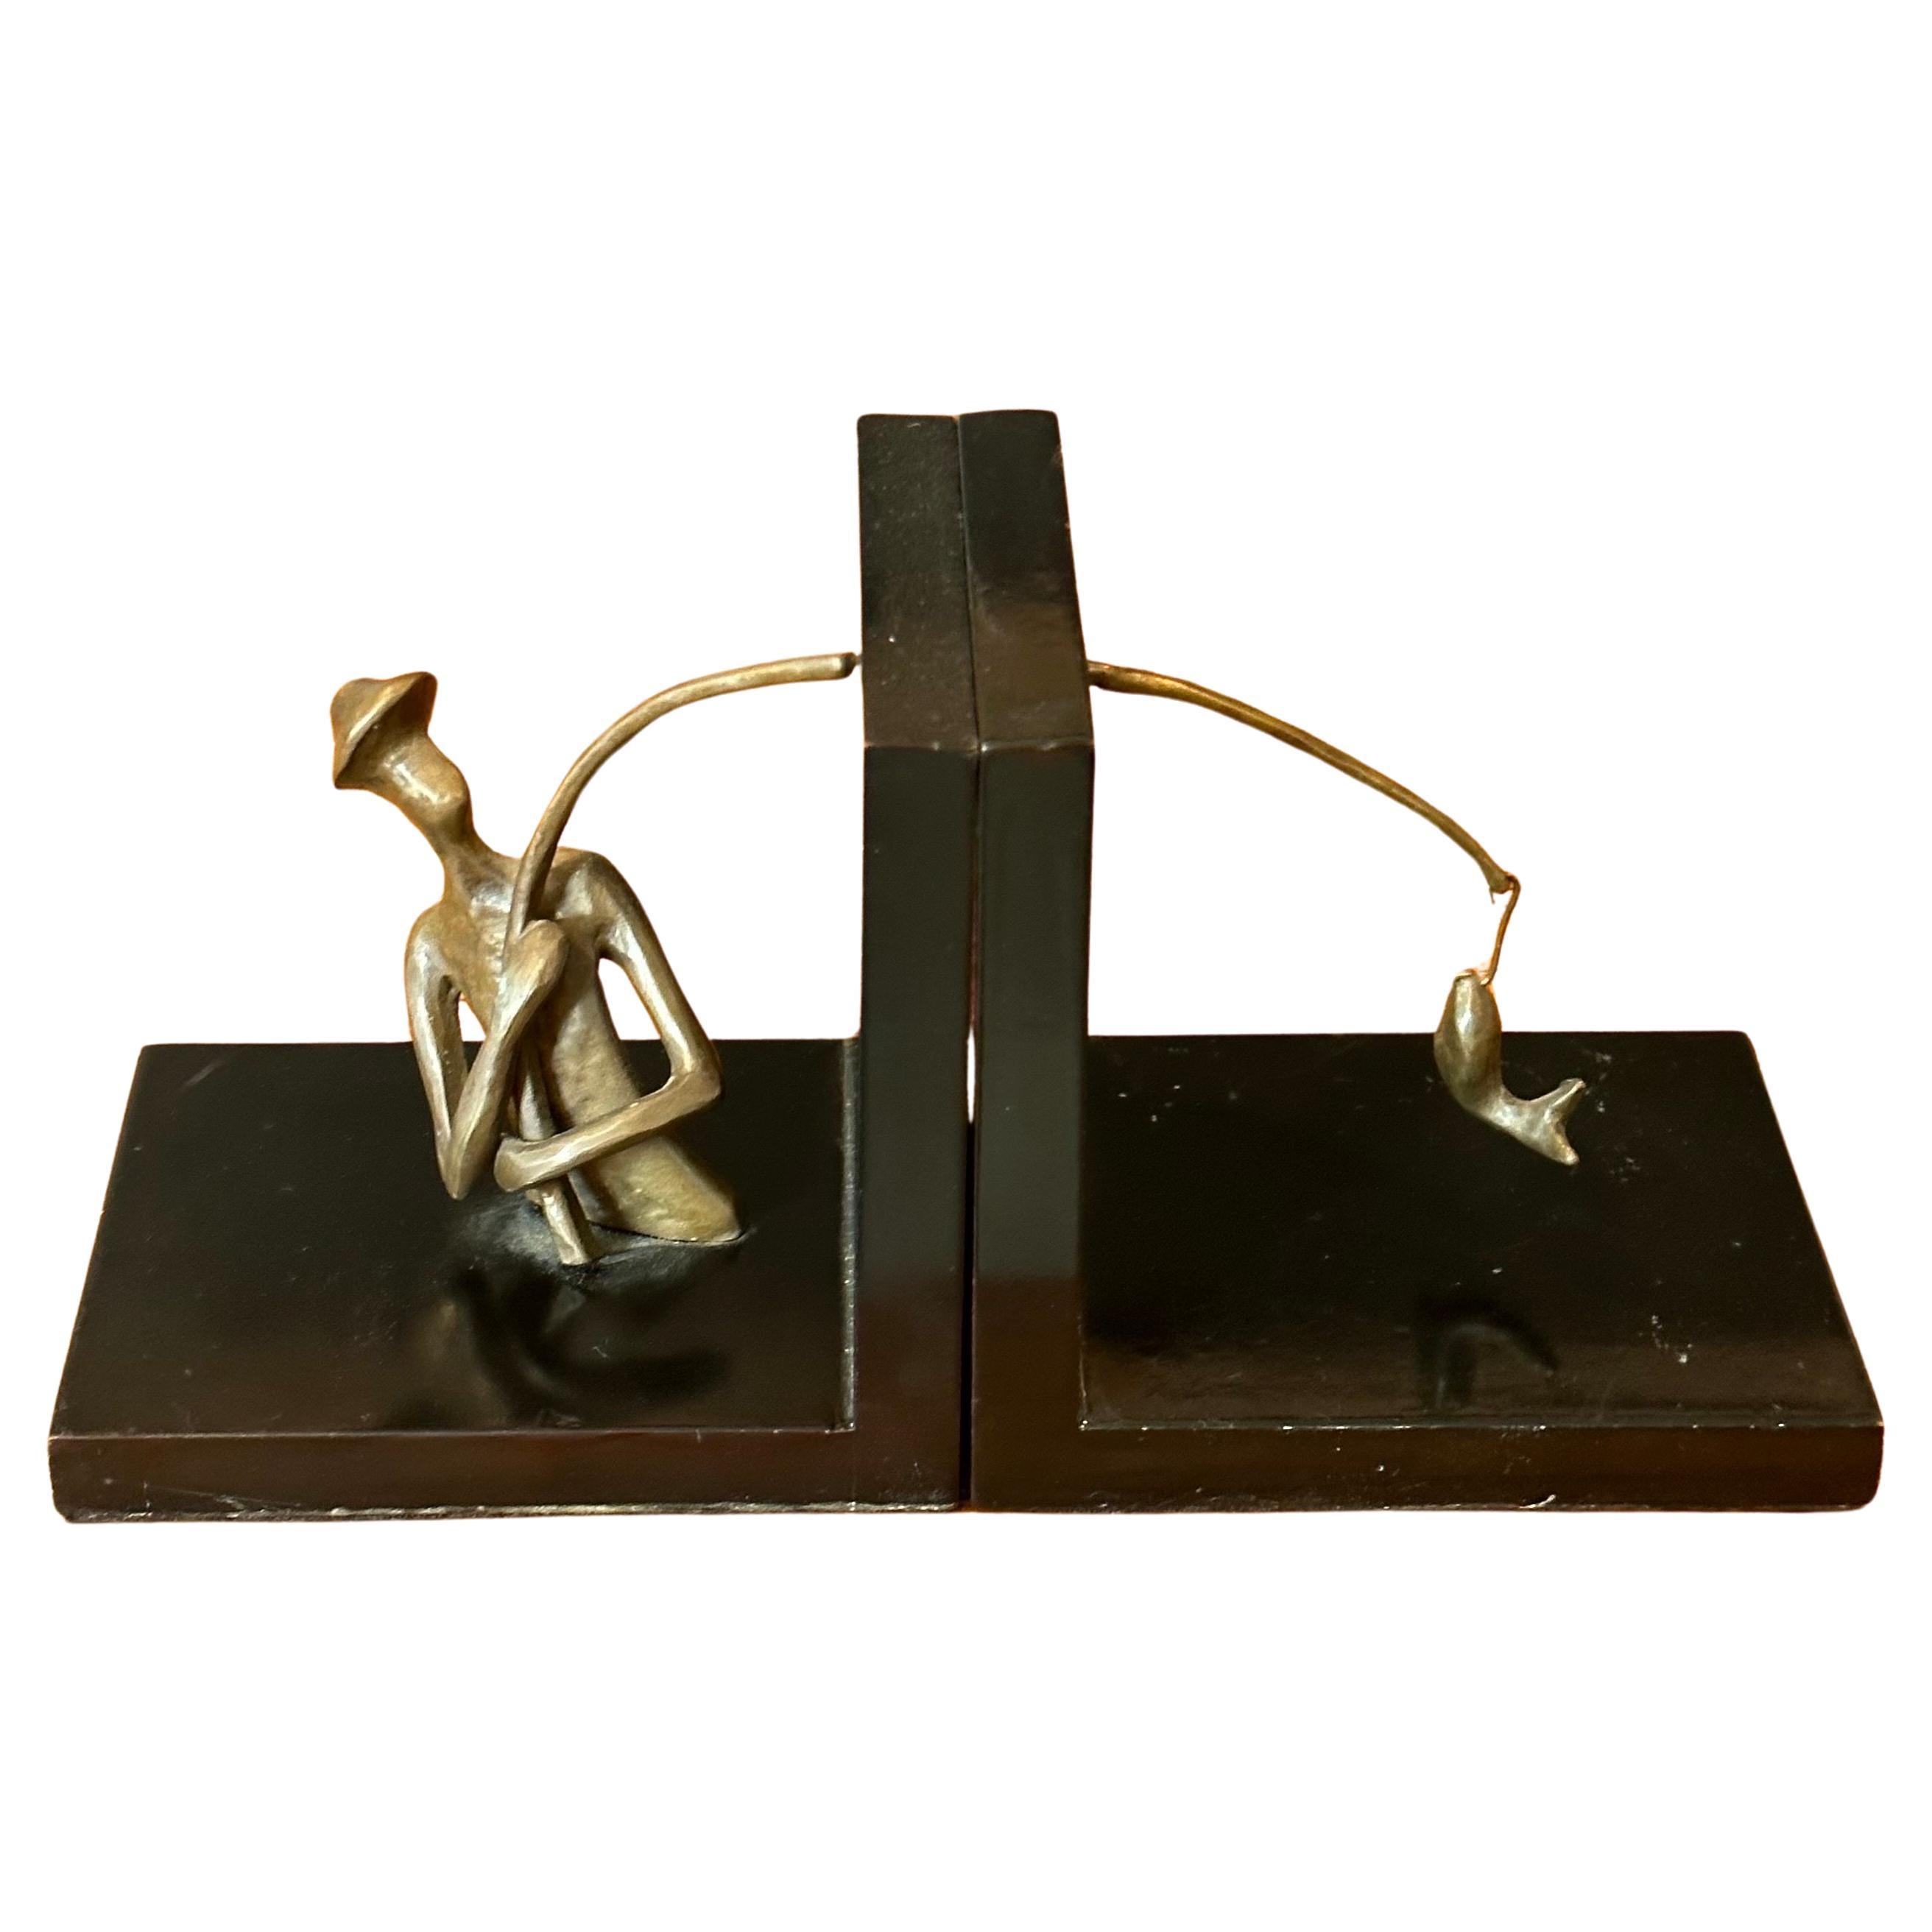 A pair of bronze and black lacquer fisherman bookends., circa 1970s.  The set are in good vintage condition and measure 10.25